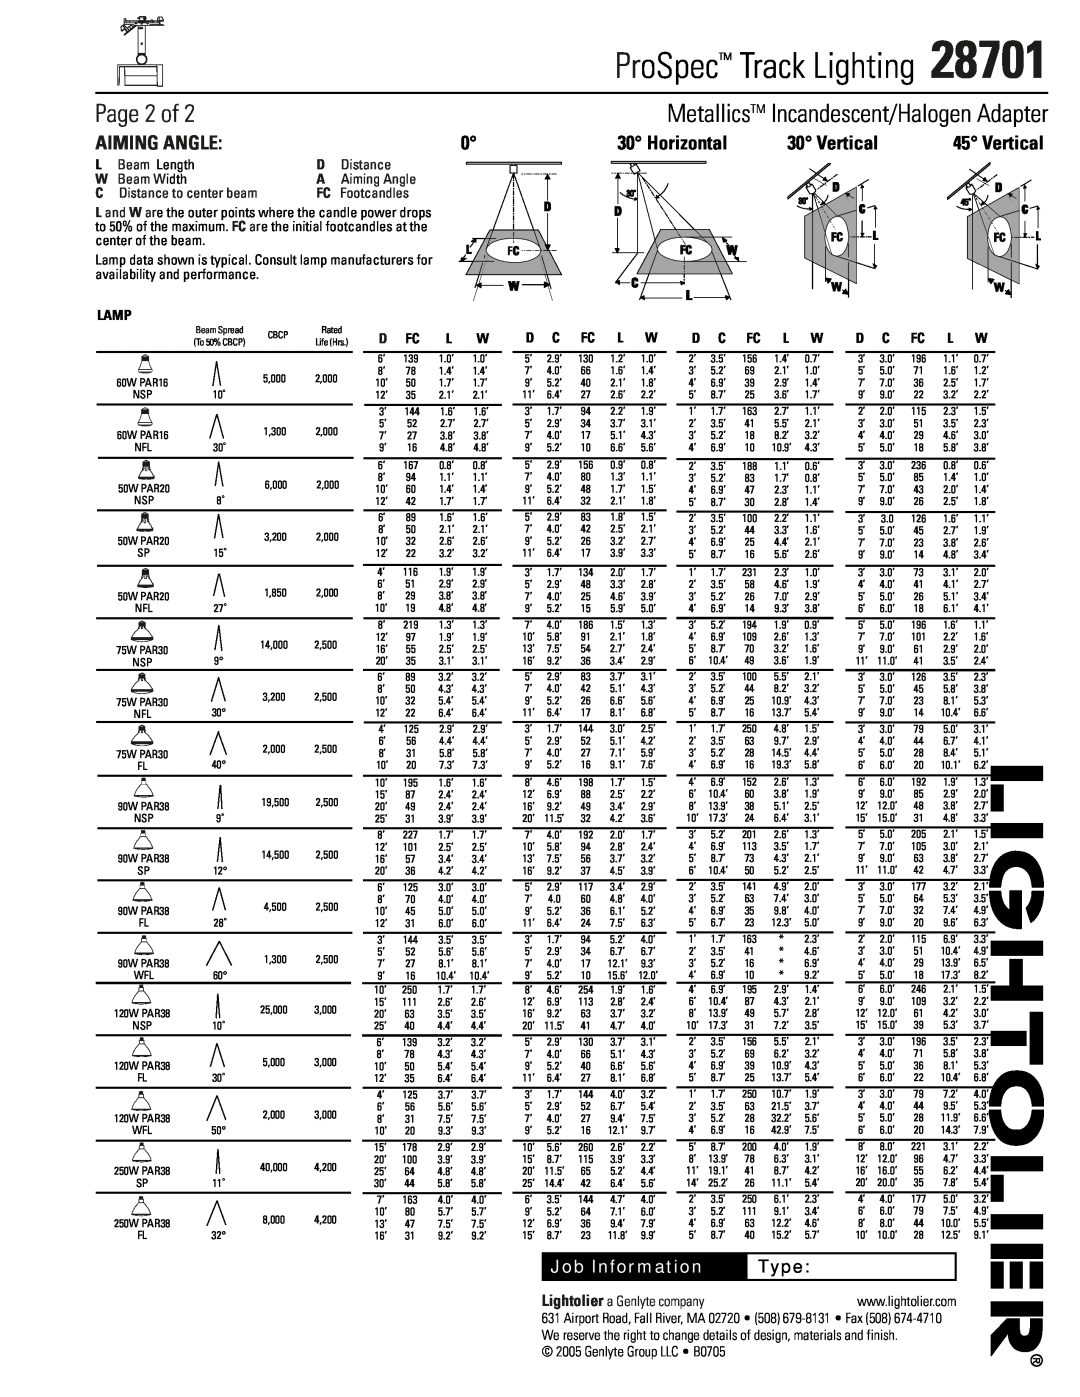 Lightolier 28701 Page 2 of, Aiming Angle, Horizontal, Vertical, L Beam Length, Distance, W Beam Width, FC Footcandles 